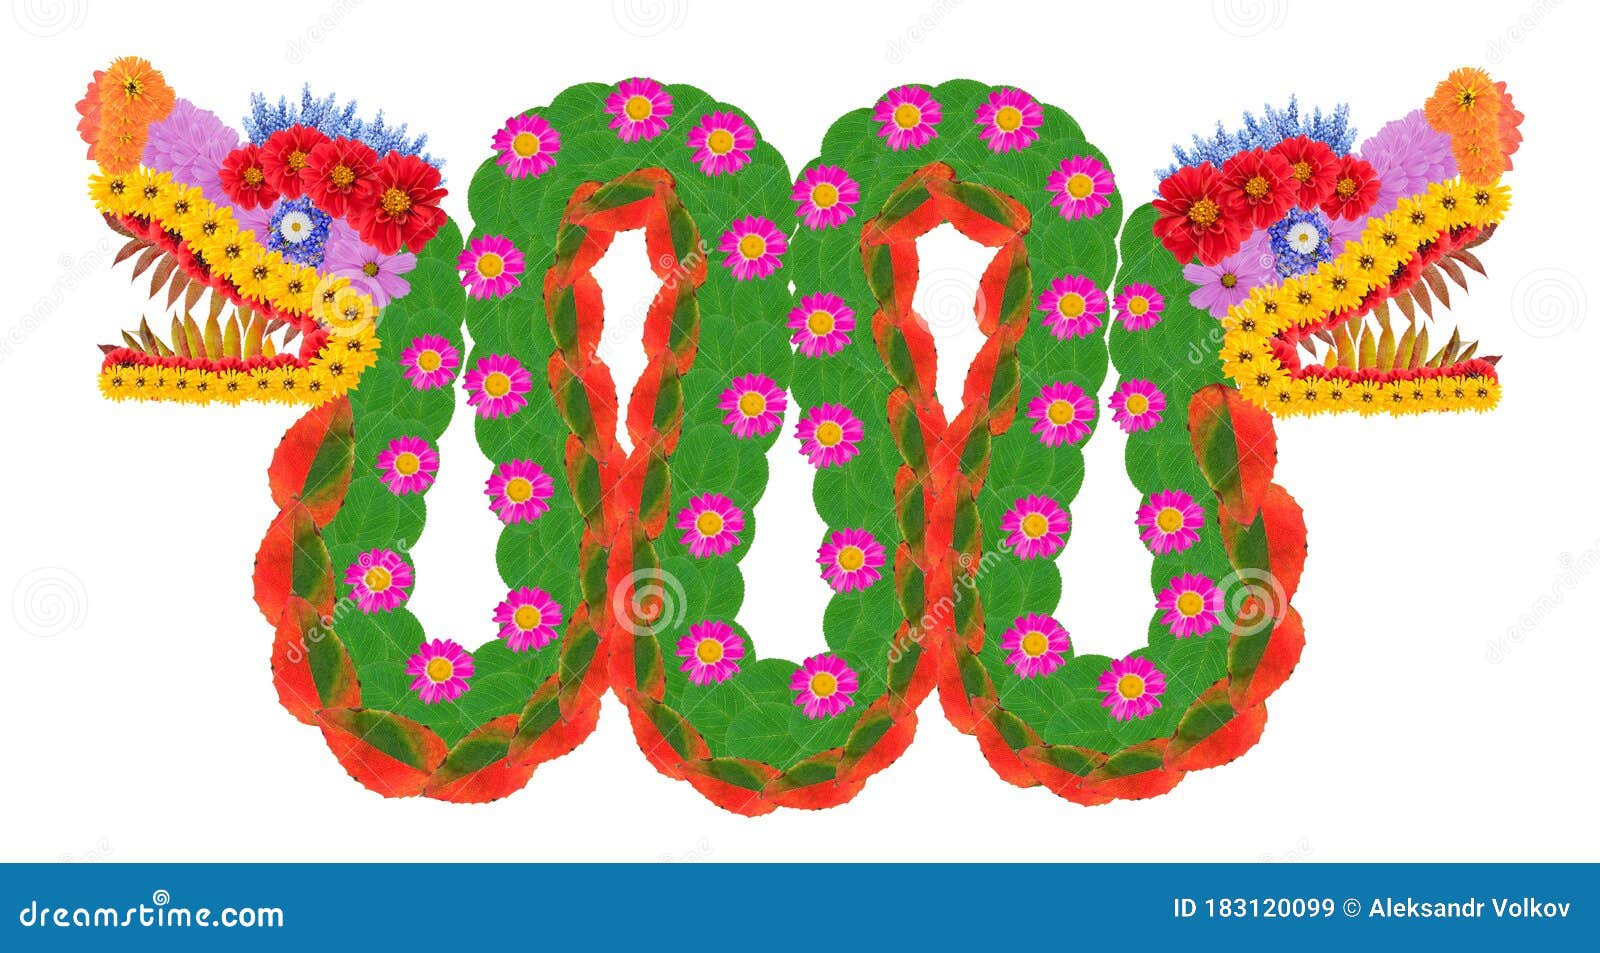 Kundalini A Ancient Religious Chinese Symbol Of Inner Strength In The Form Of A Curled Snake With Heads At Both Ends Isolated Stock Image Image Of Animal Background 183120099